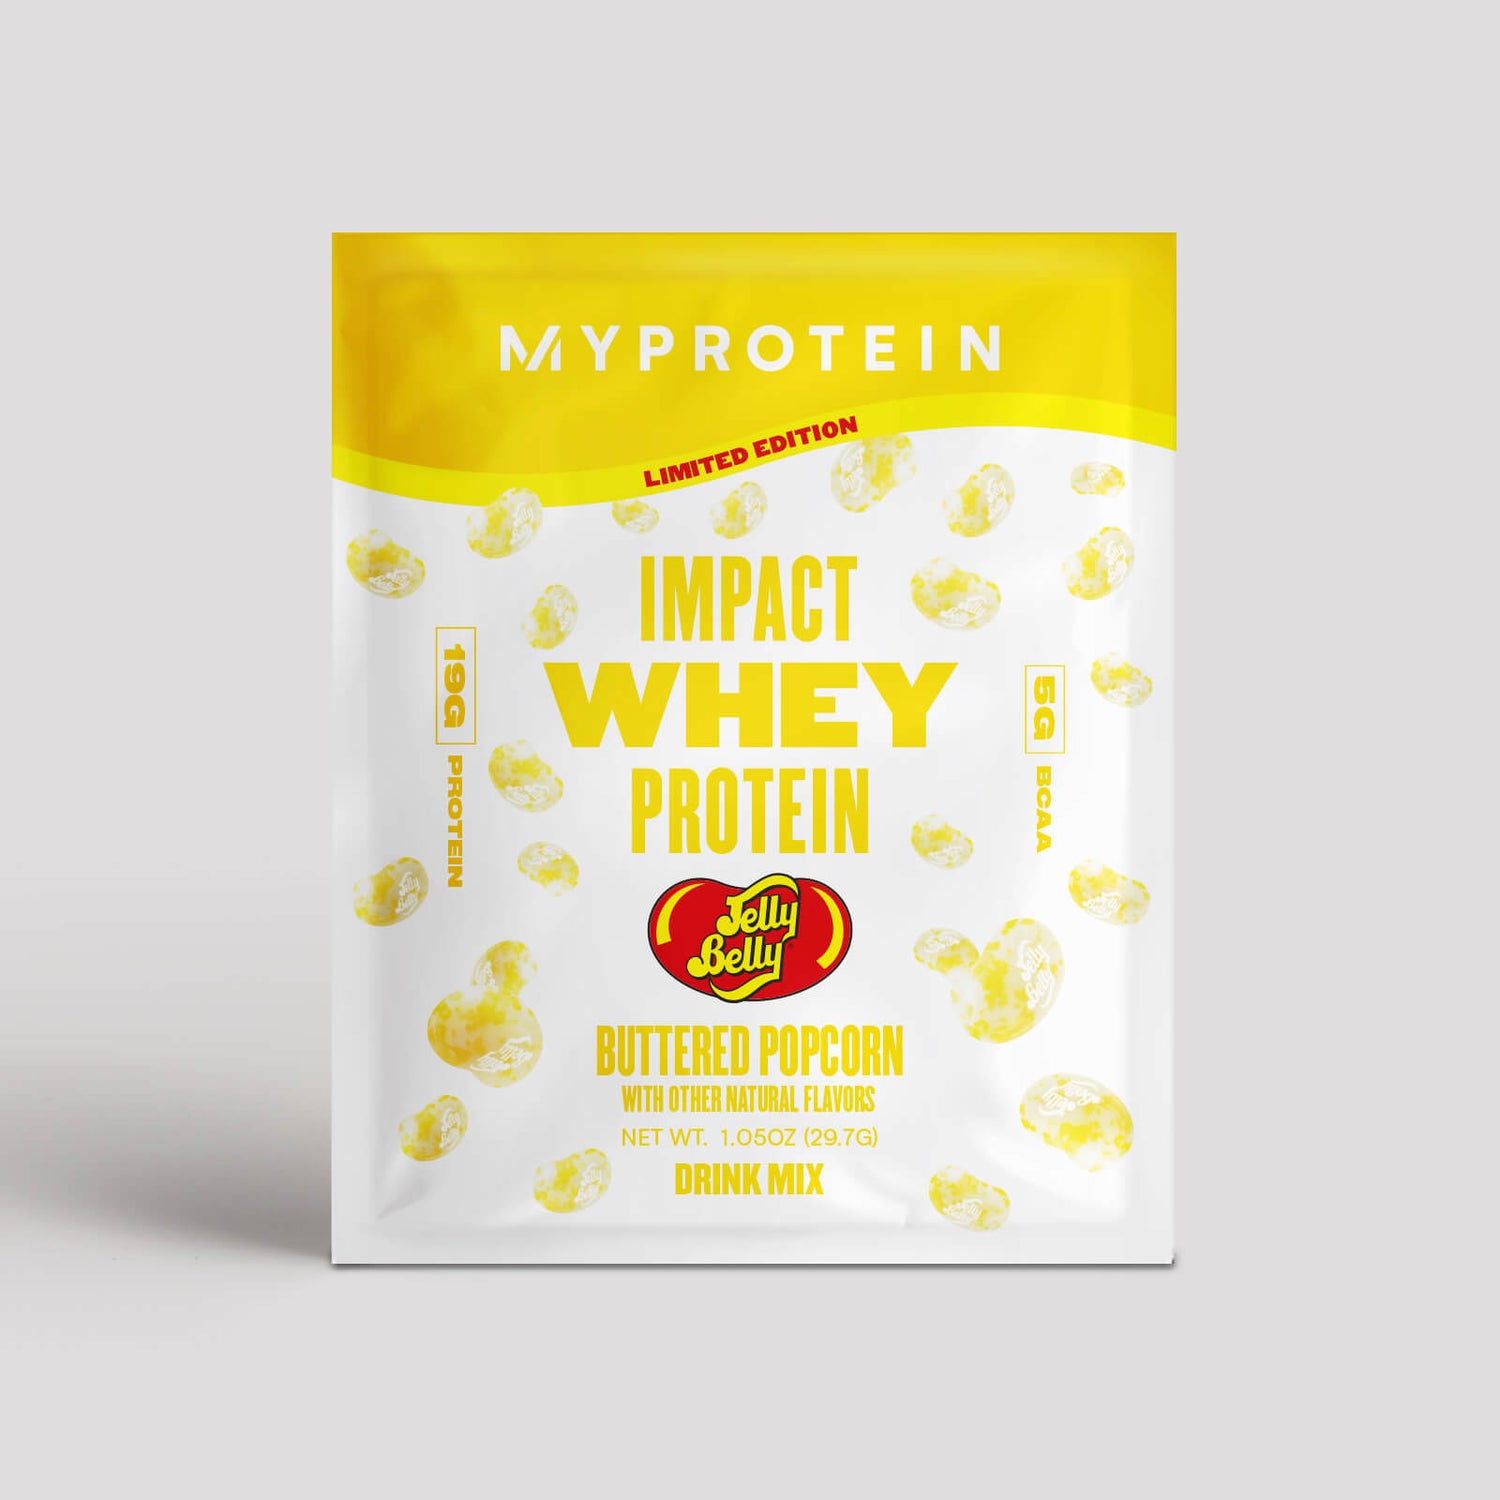 Impact Whey Protein x Jelly Belly Buttered Popcorn (sample) - Butter Popcorn